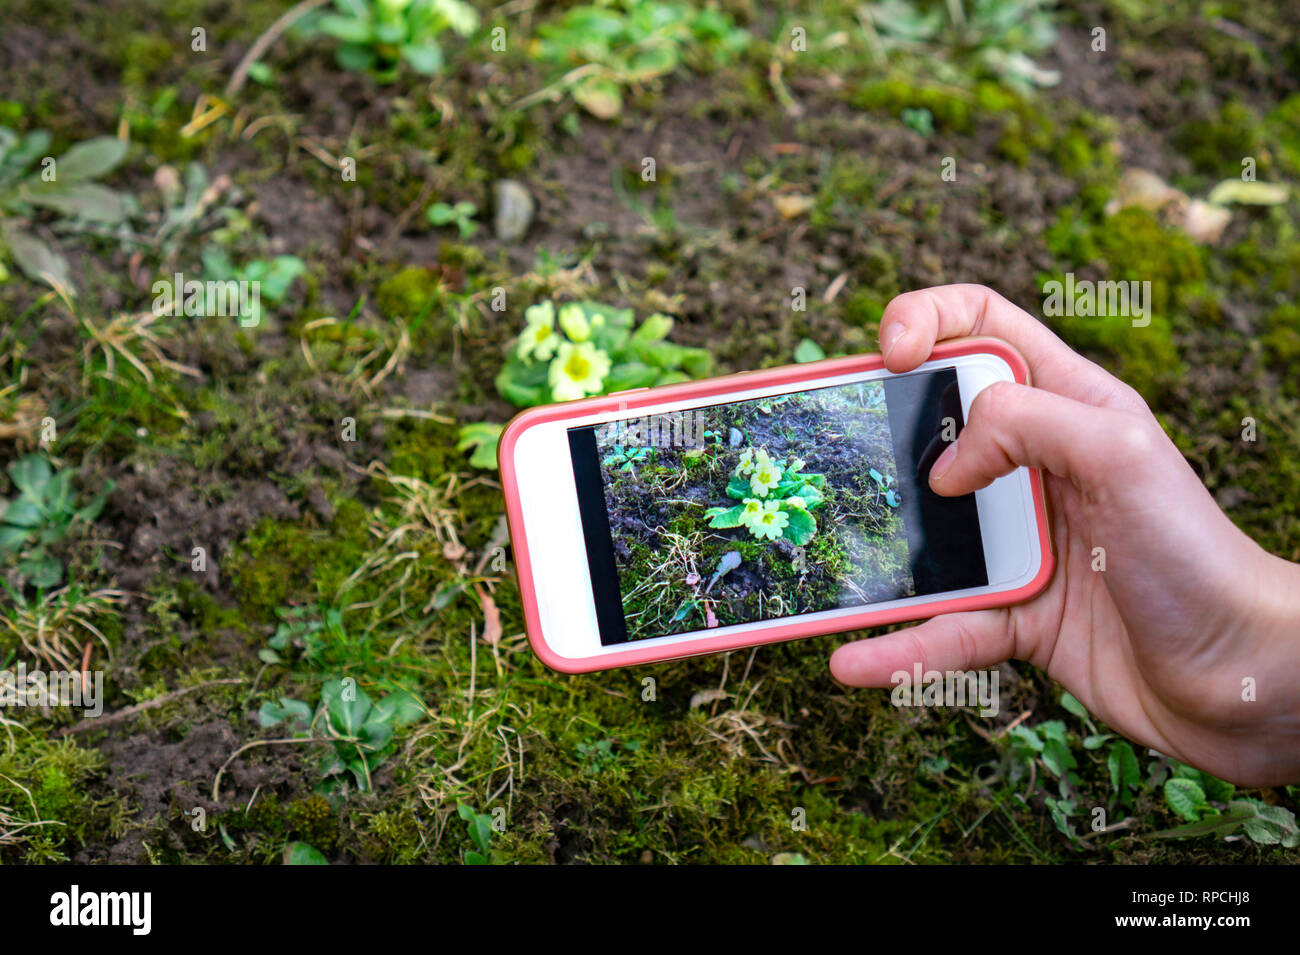 plant identification handbook application concept use technlolgy in the nature uplugged Stock Photo